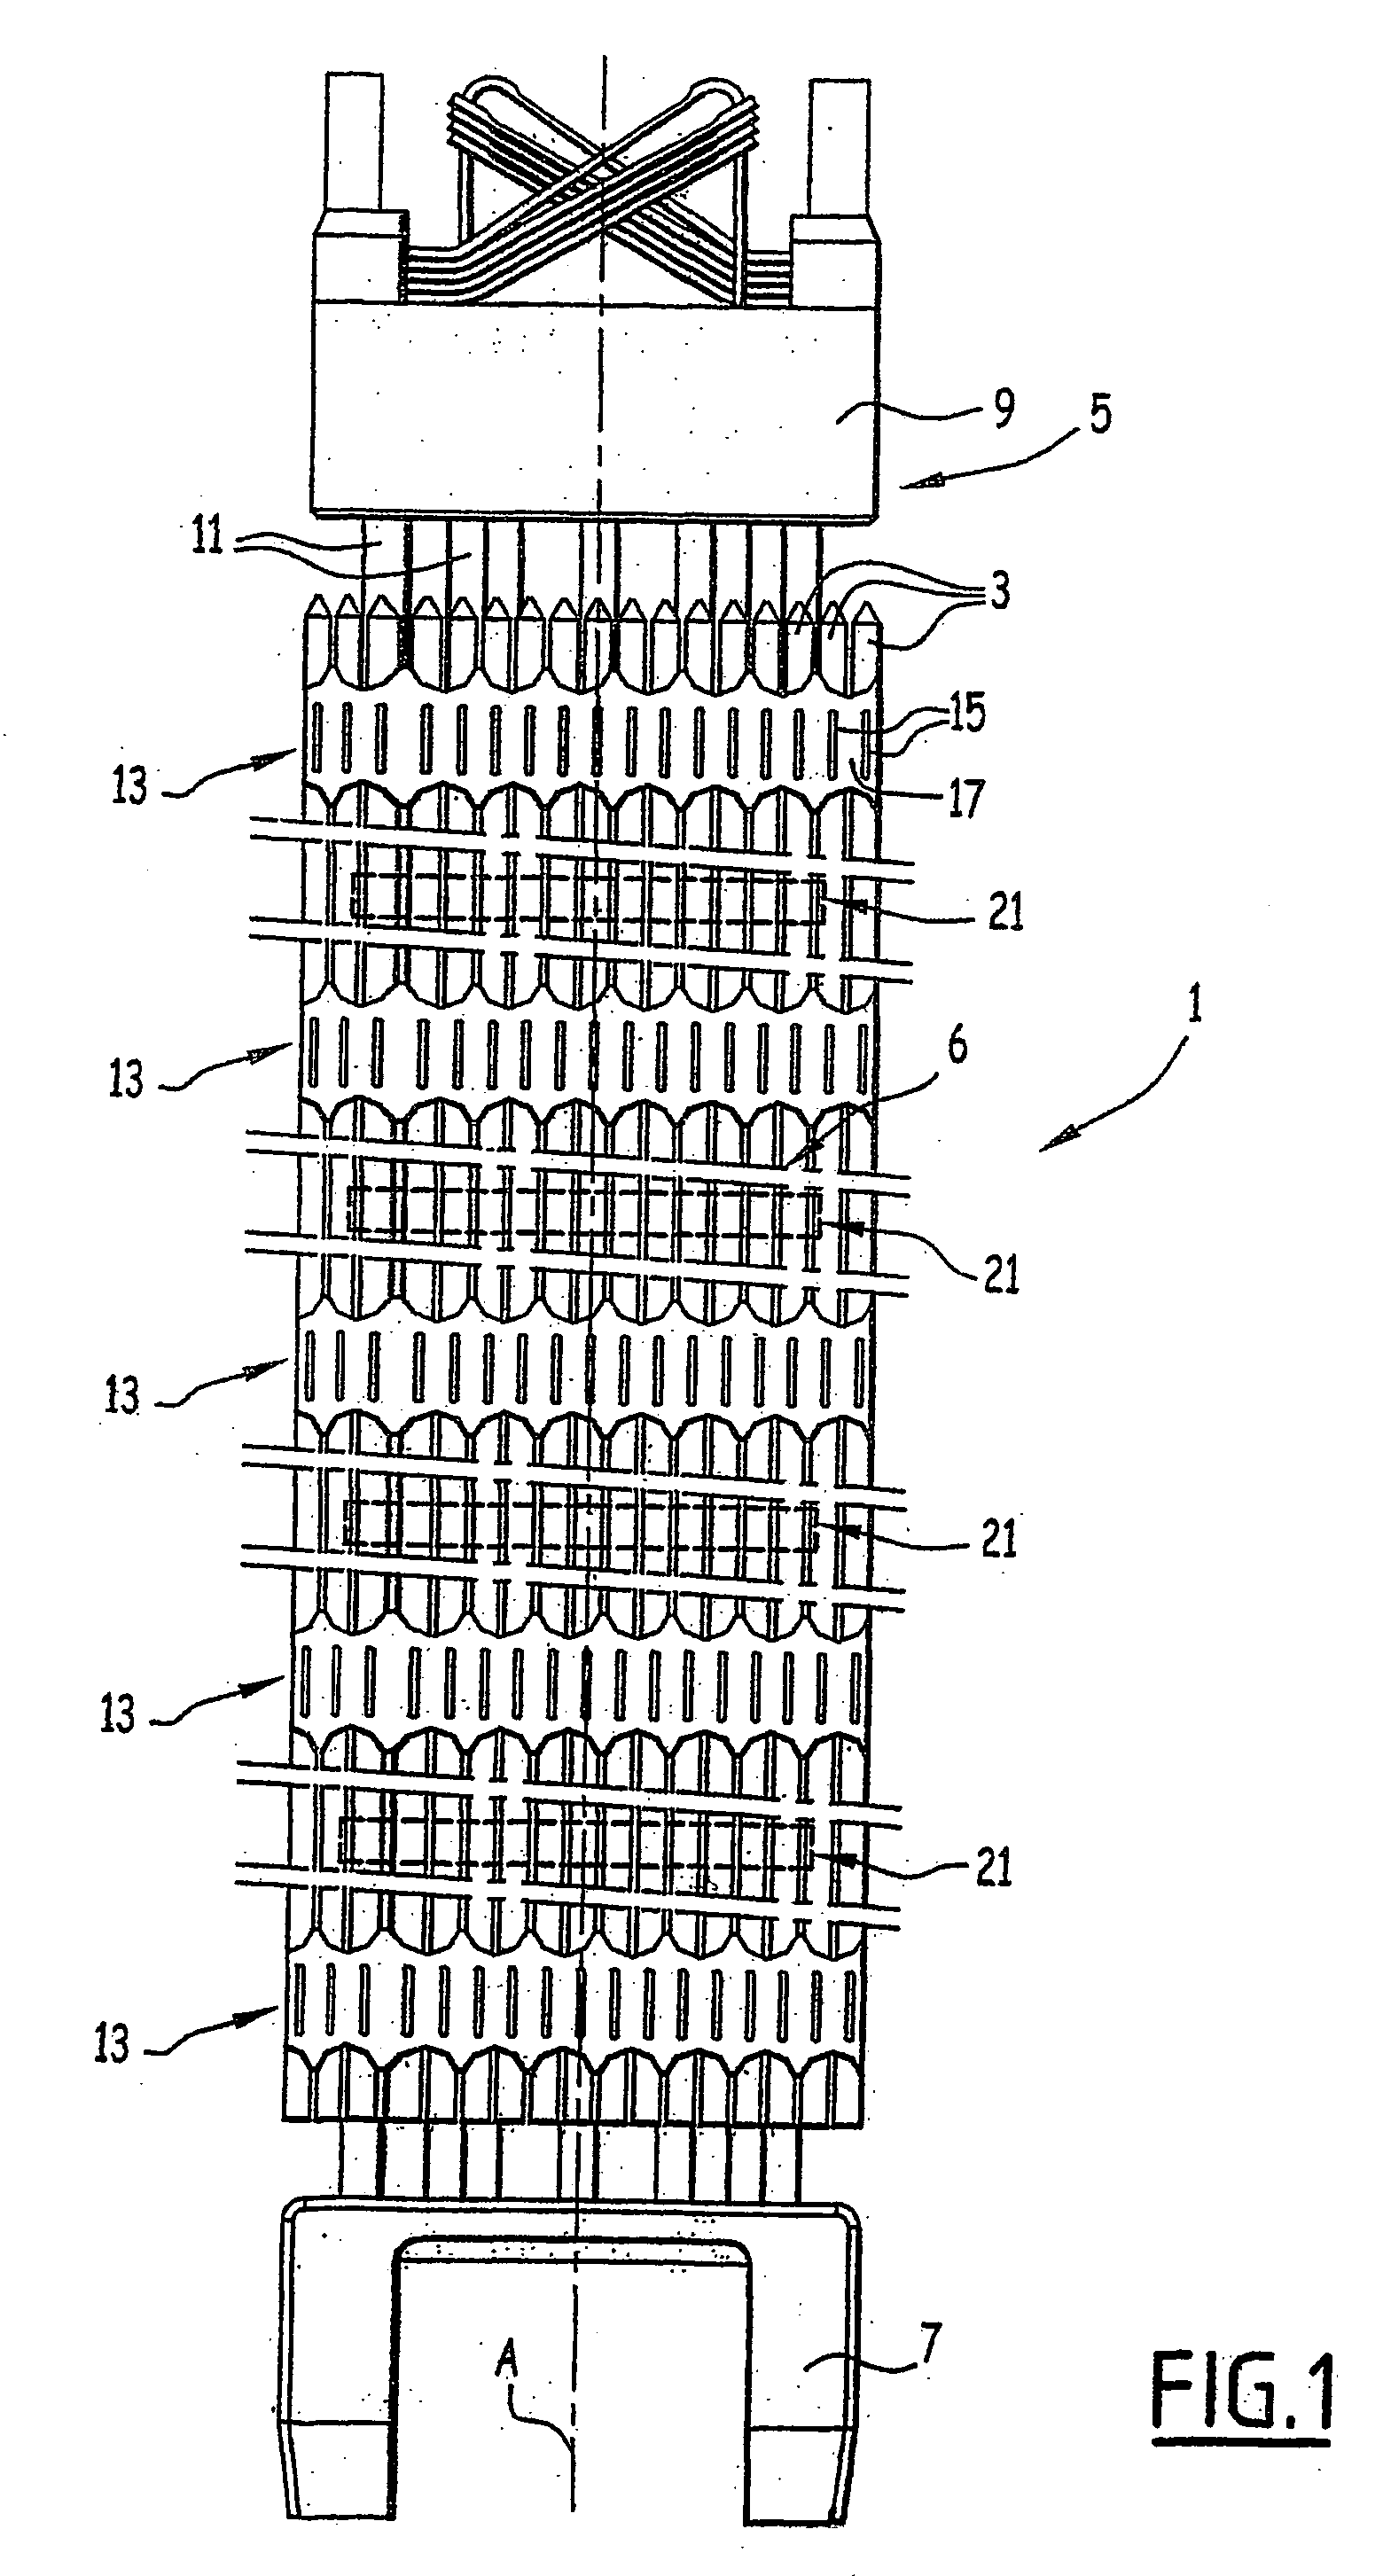 Nuclear fuel assembly comprising a reinforcing mesh device and the use of one such device in a nuclear fuel assembly